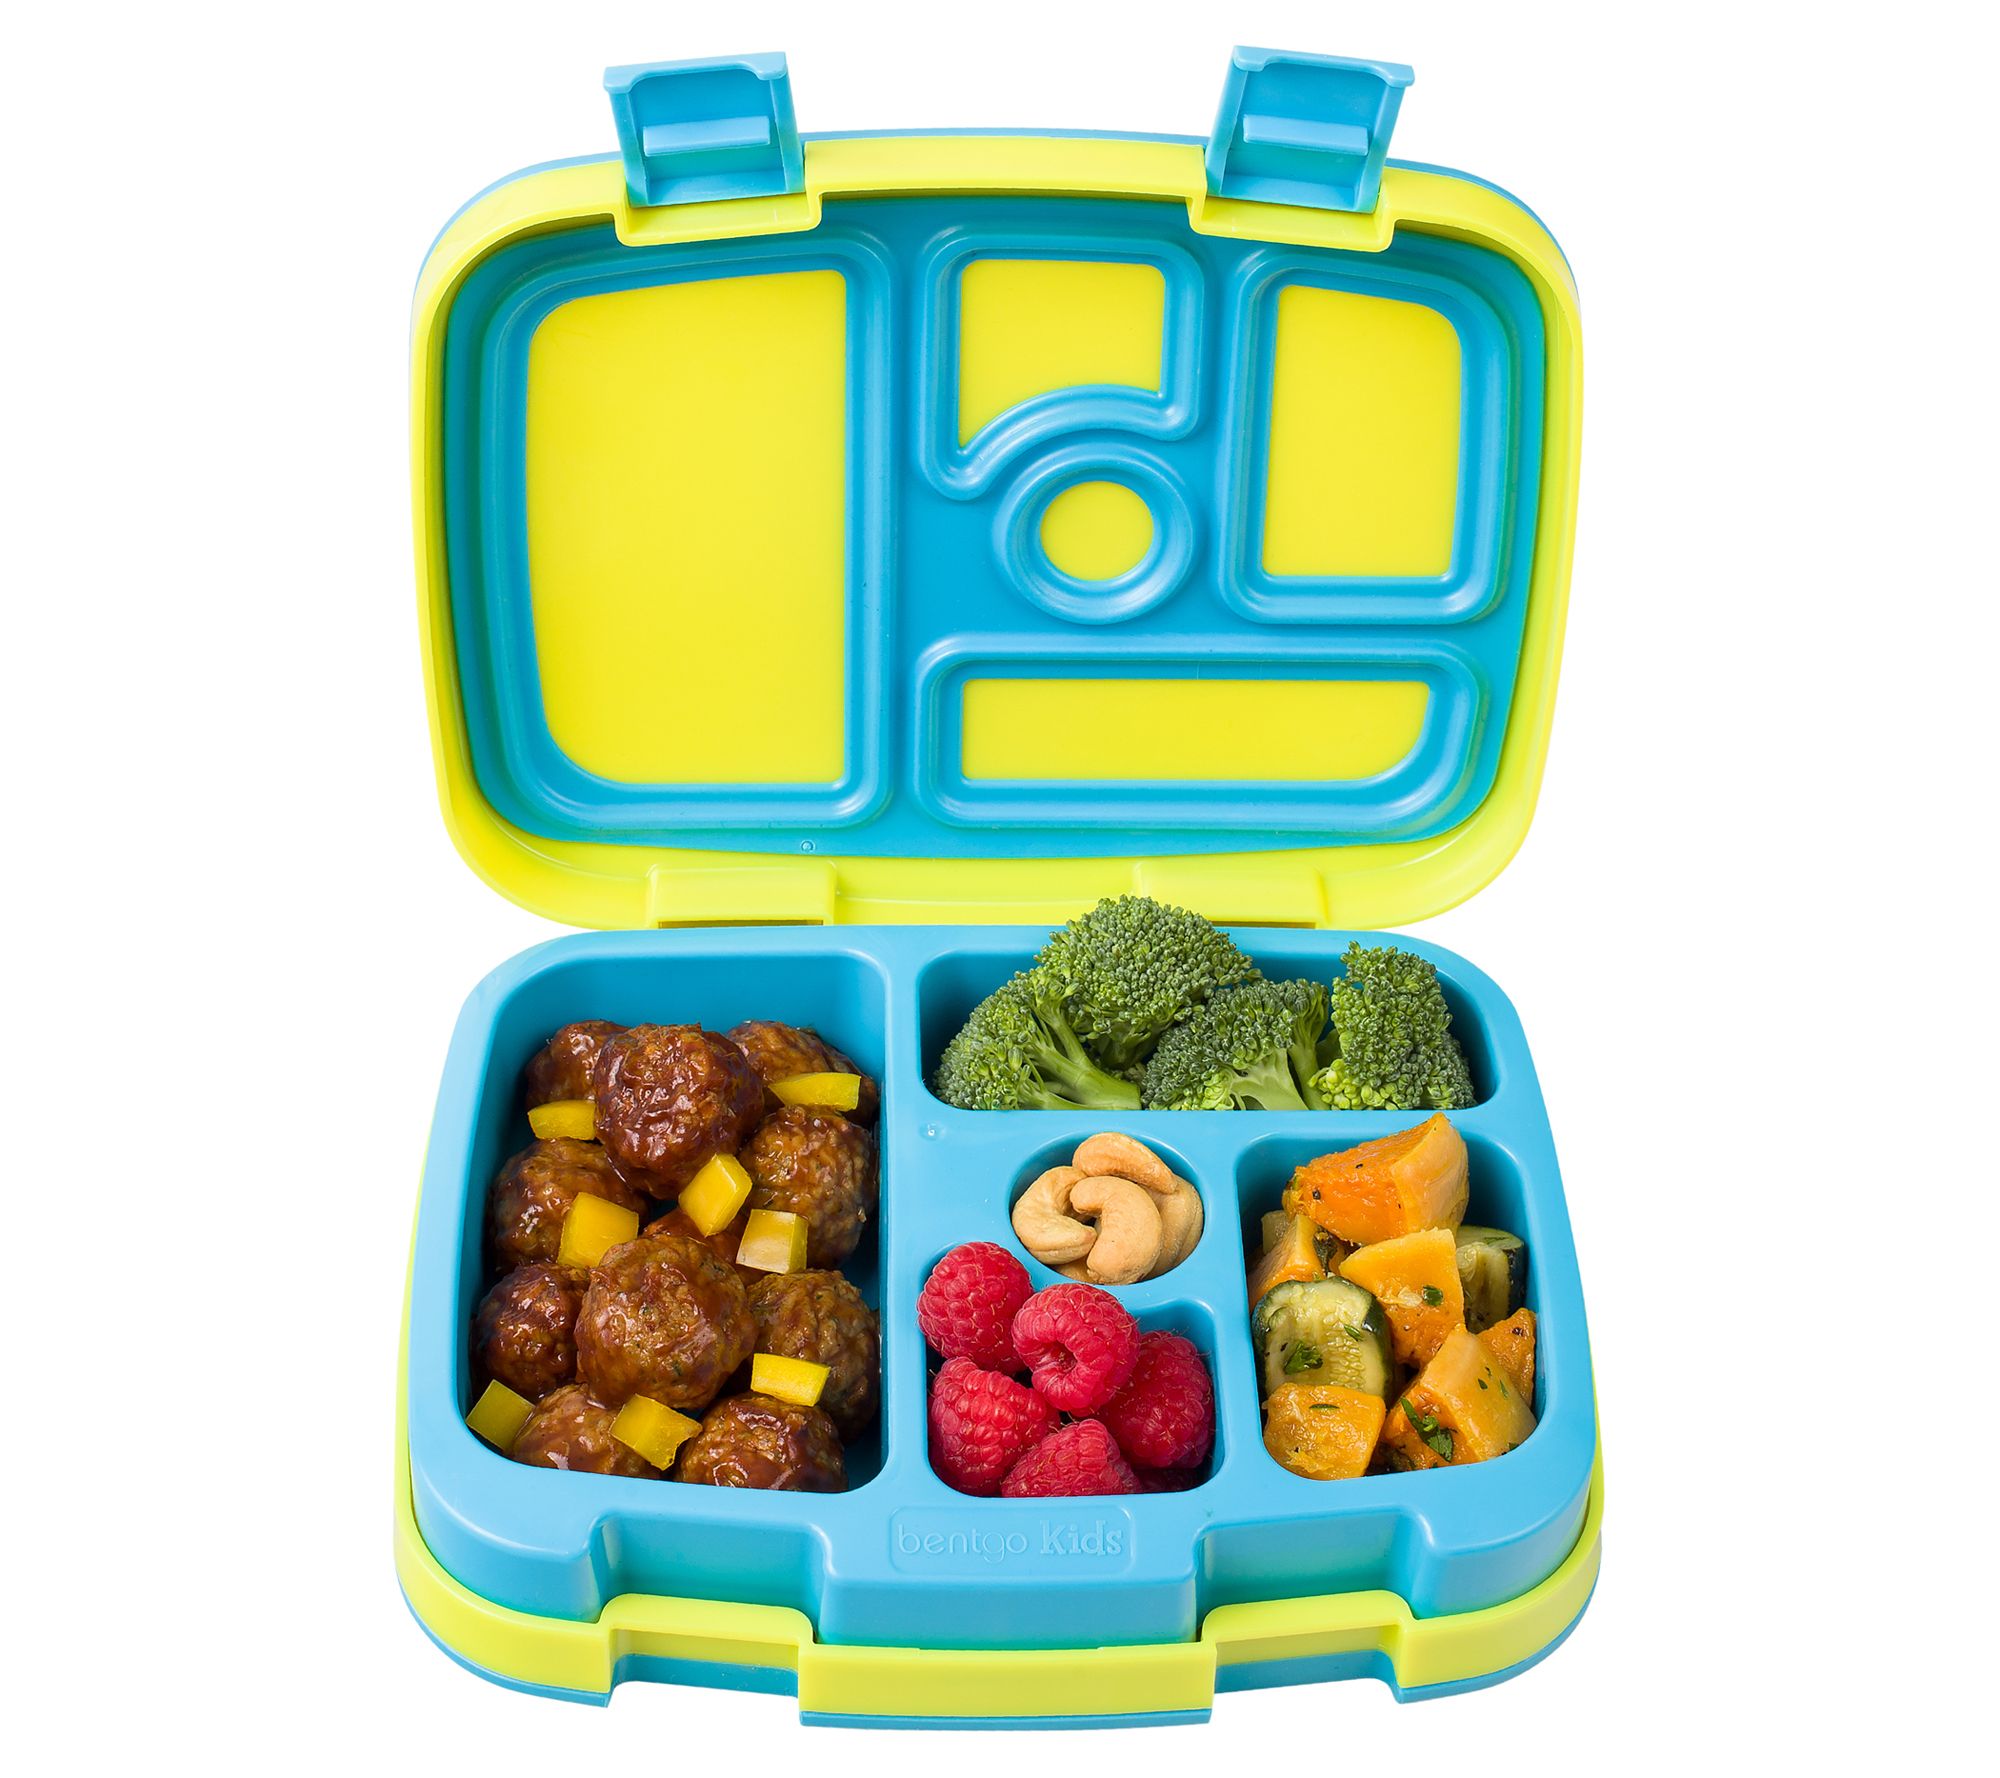 8 Reasons to Look Into a Bentgo Lunchbox- Friday We're In Love